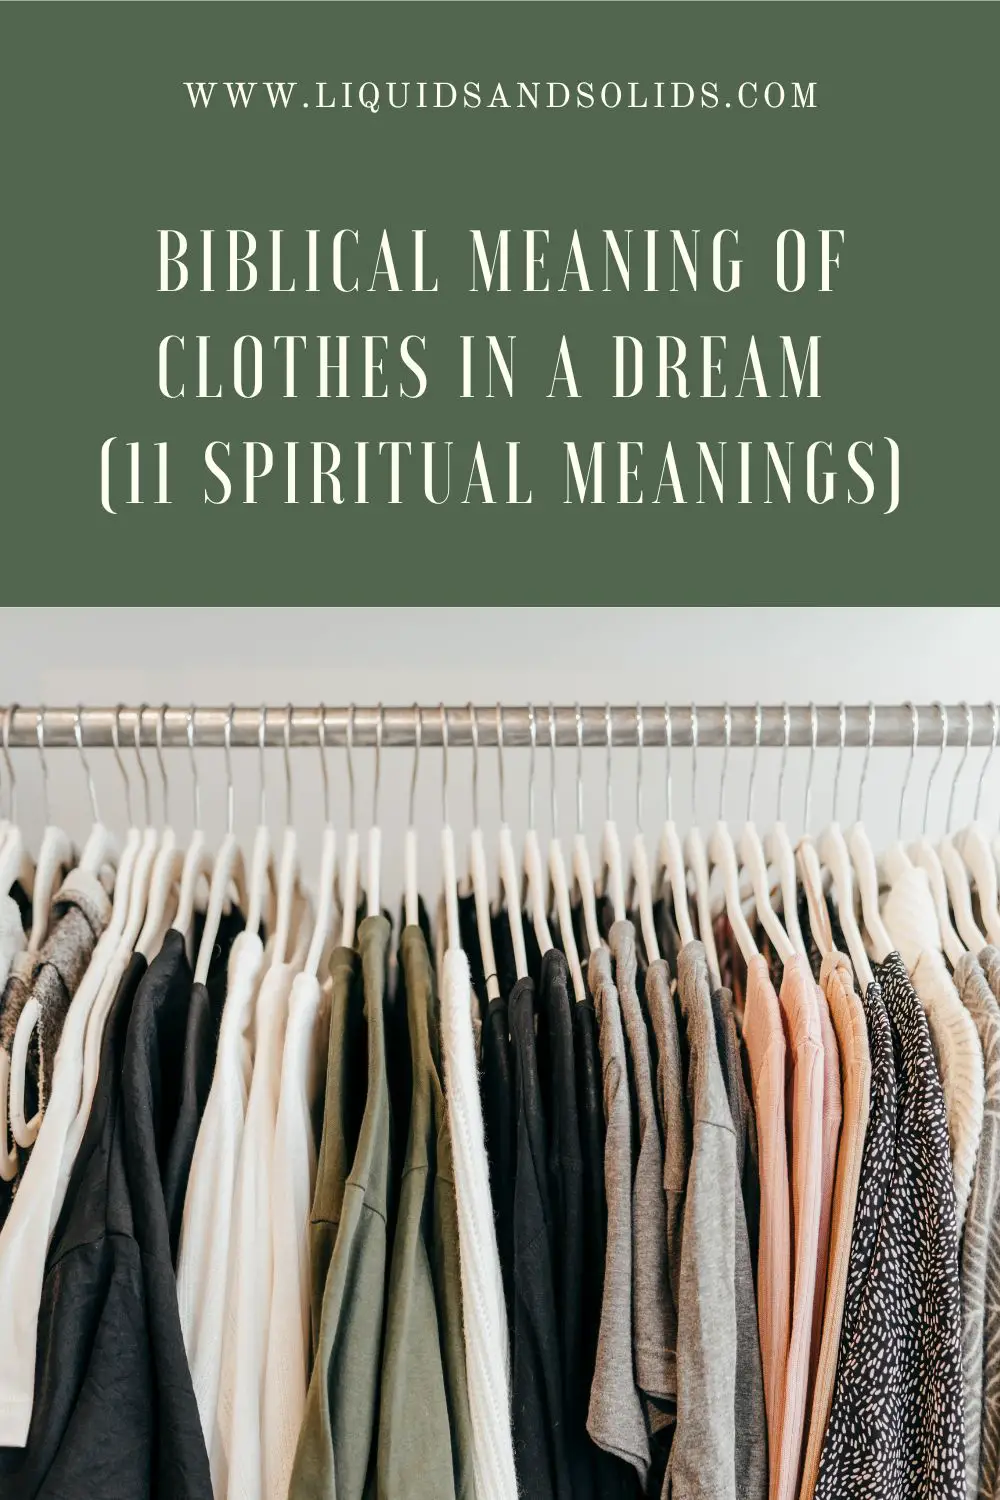 1. Shopping For Clothes In Dreams And Your Inner World